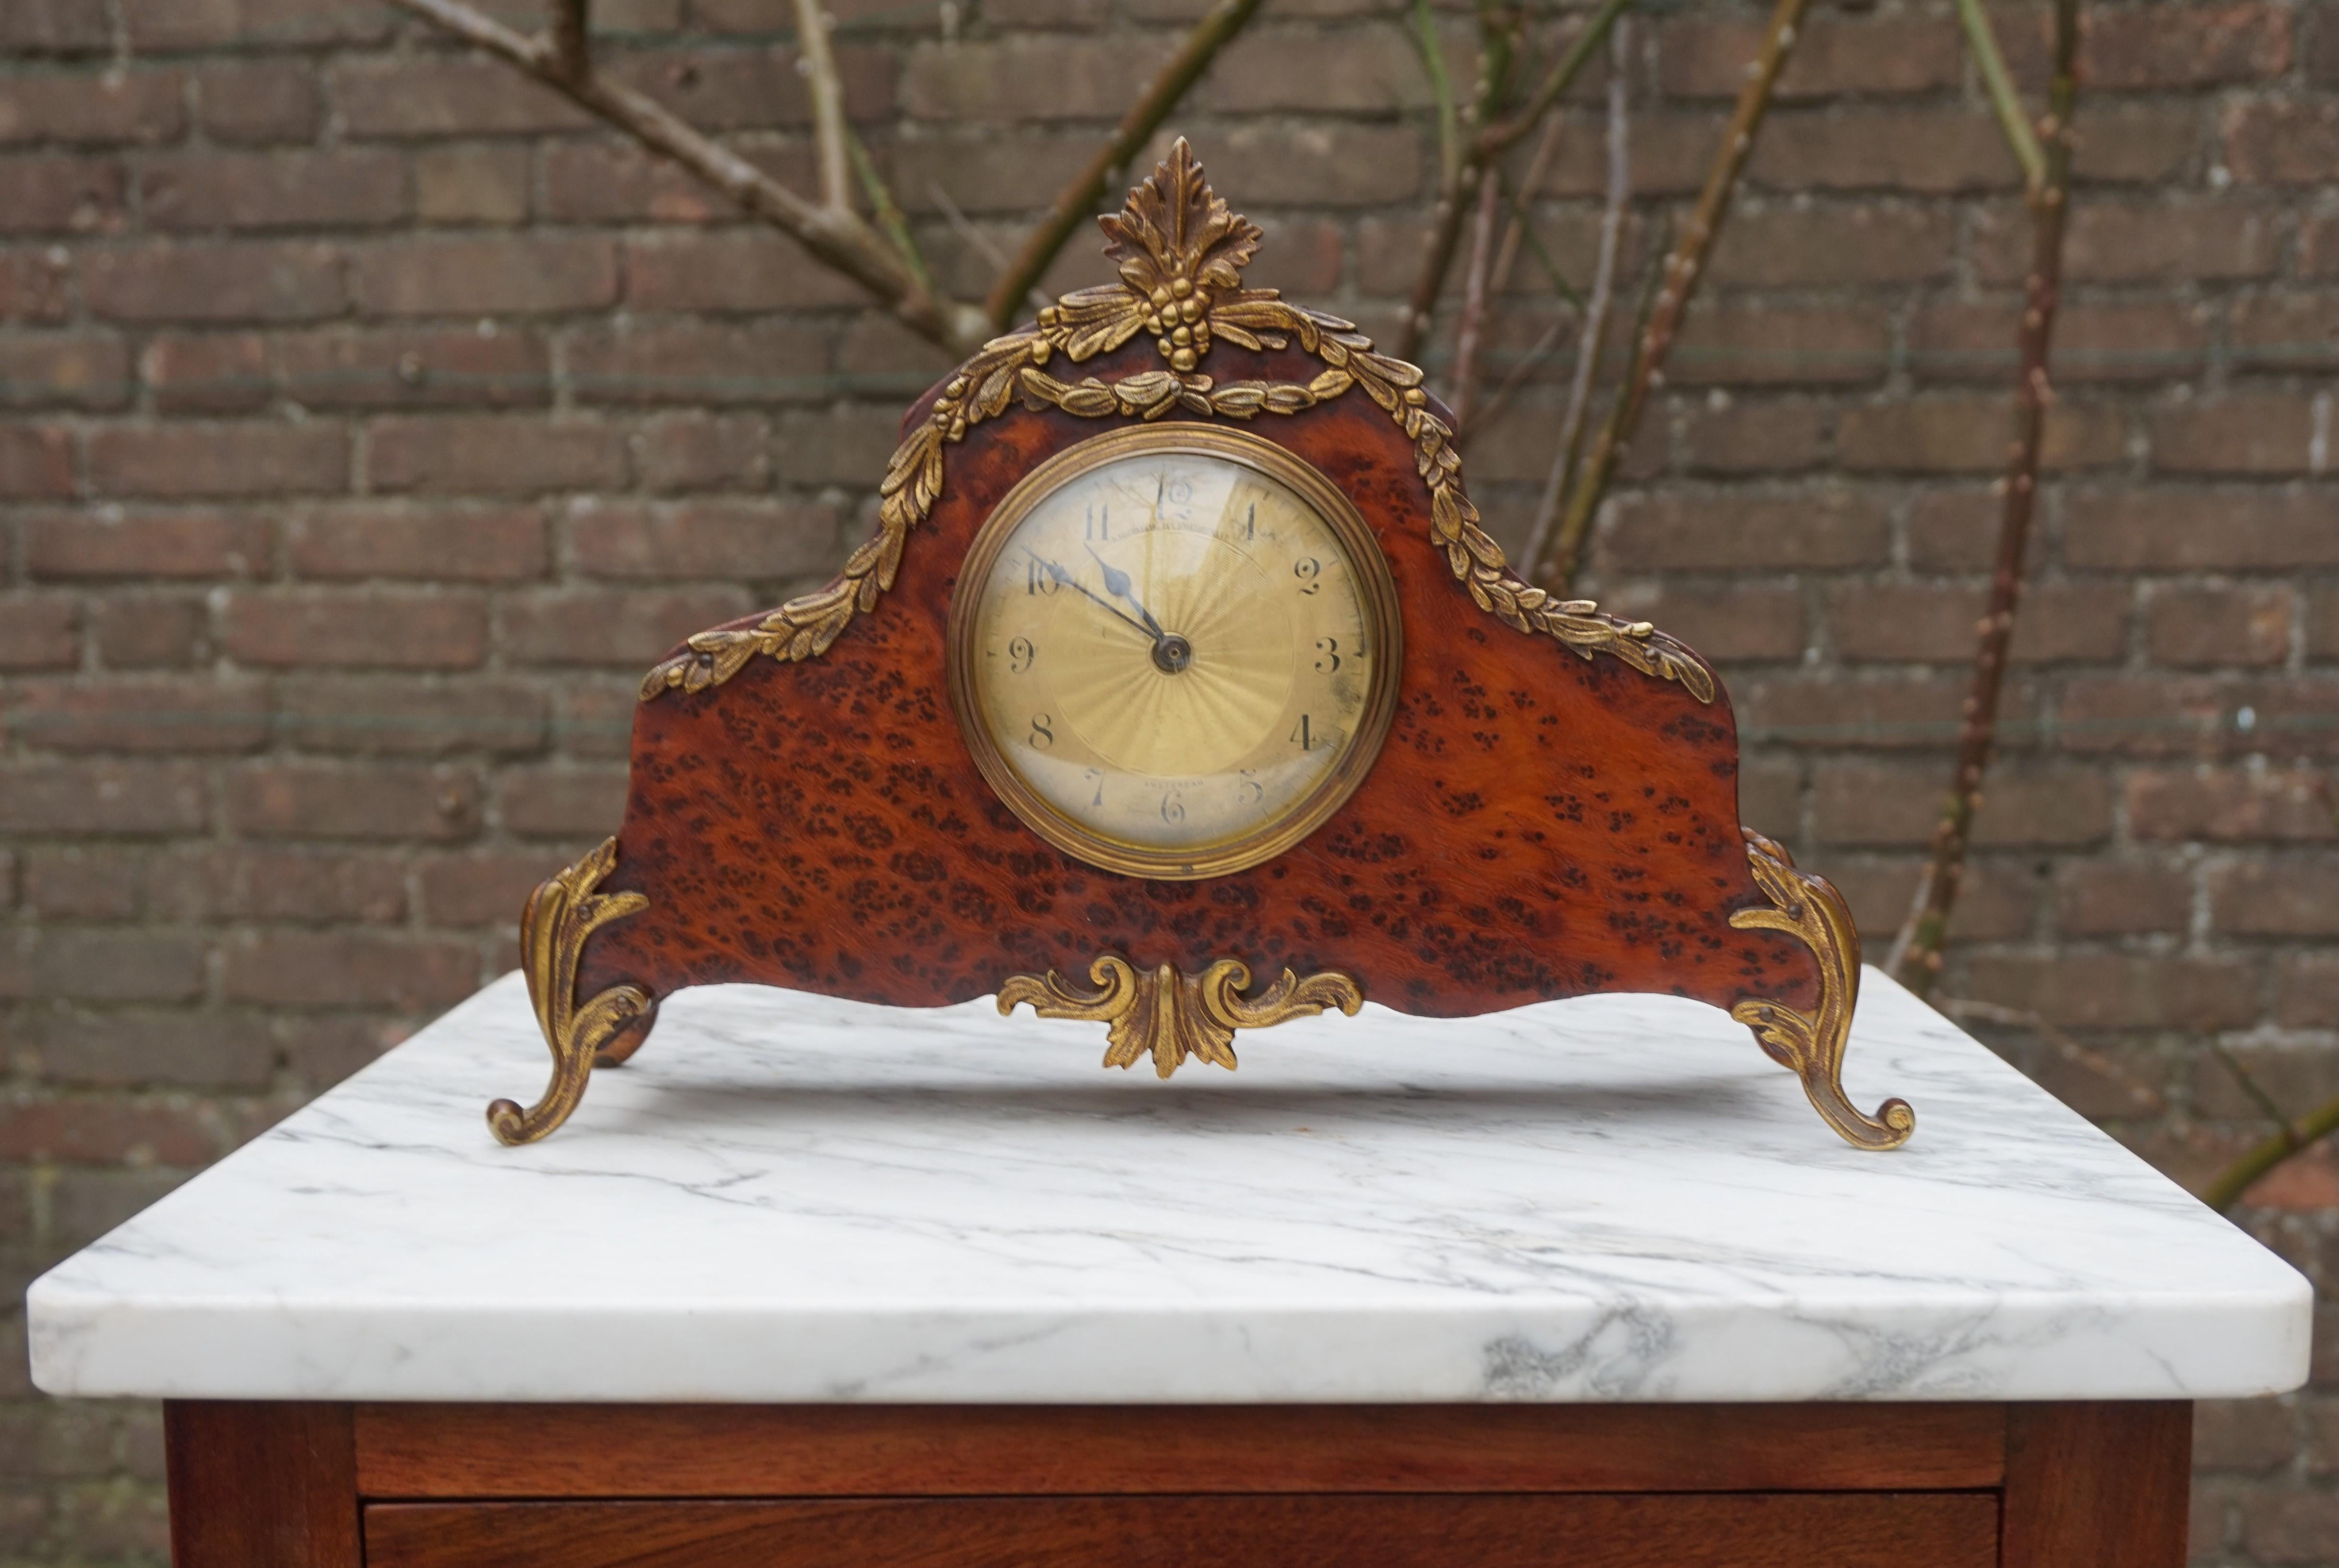 Hand-Crafted Stunning Burl Walnut Table or Mantel Clock with Stylish Bronze Feet & Ornaments